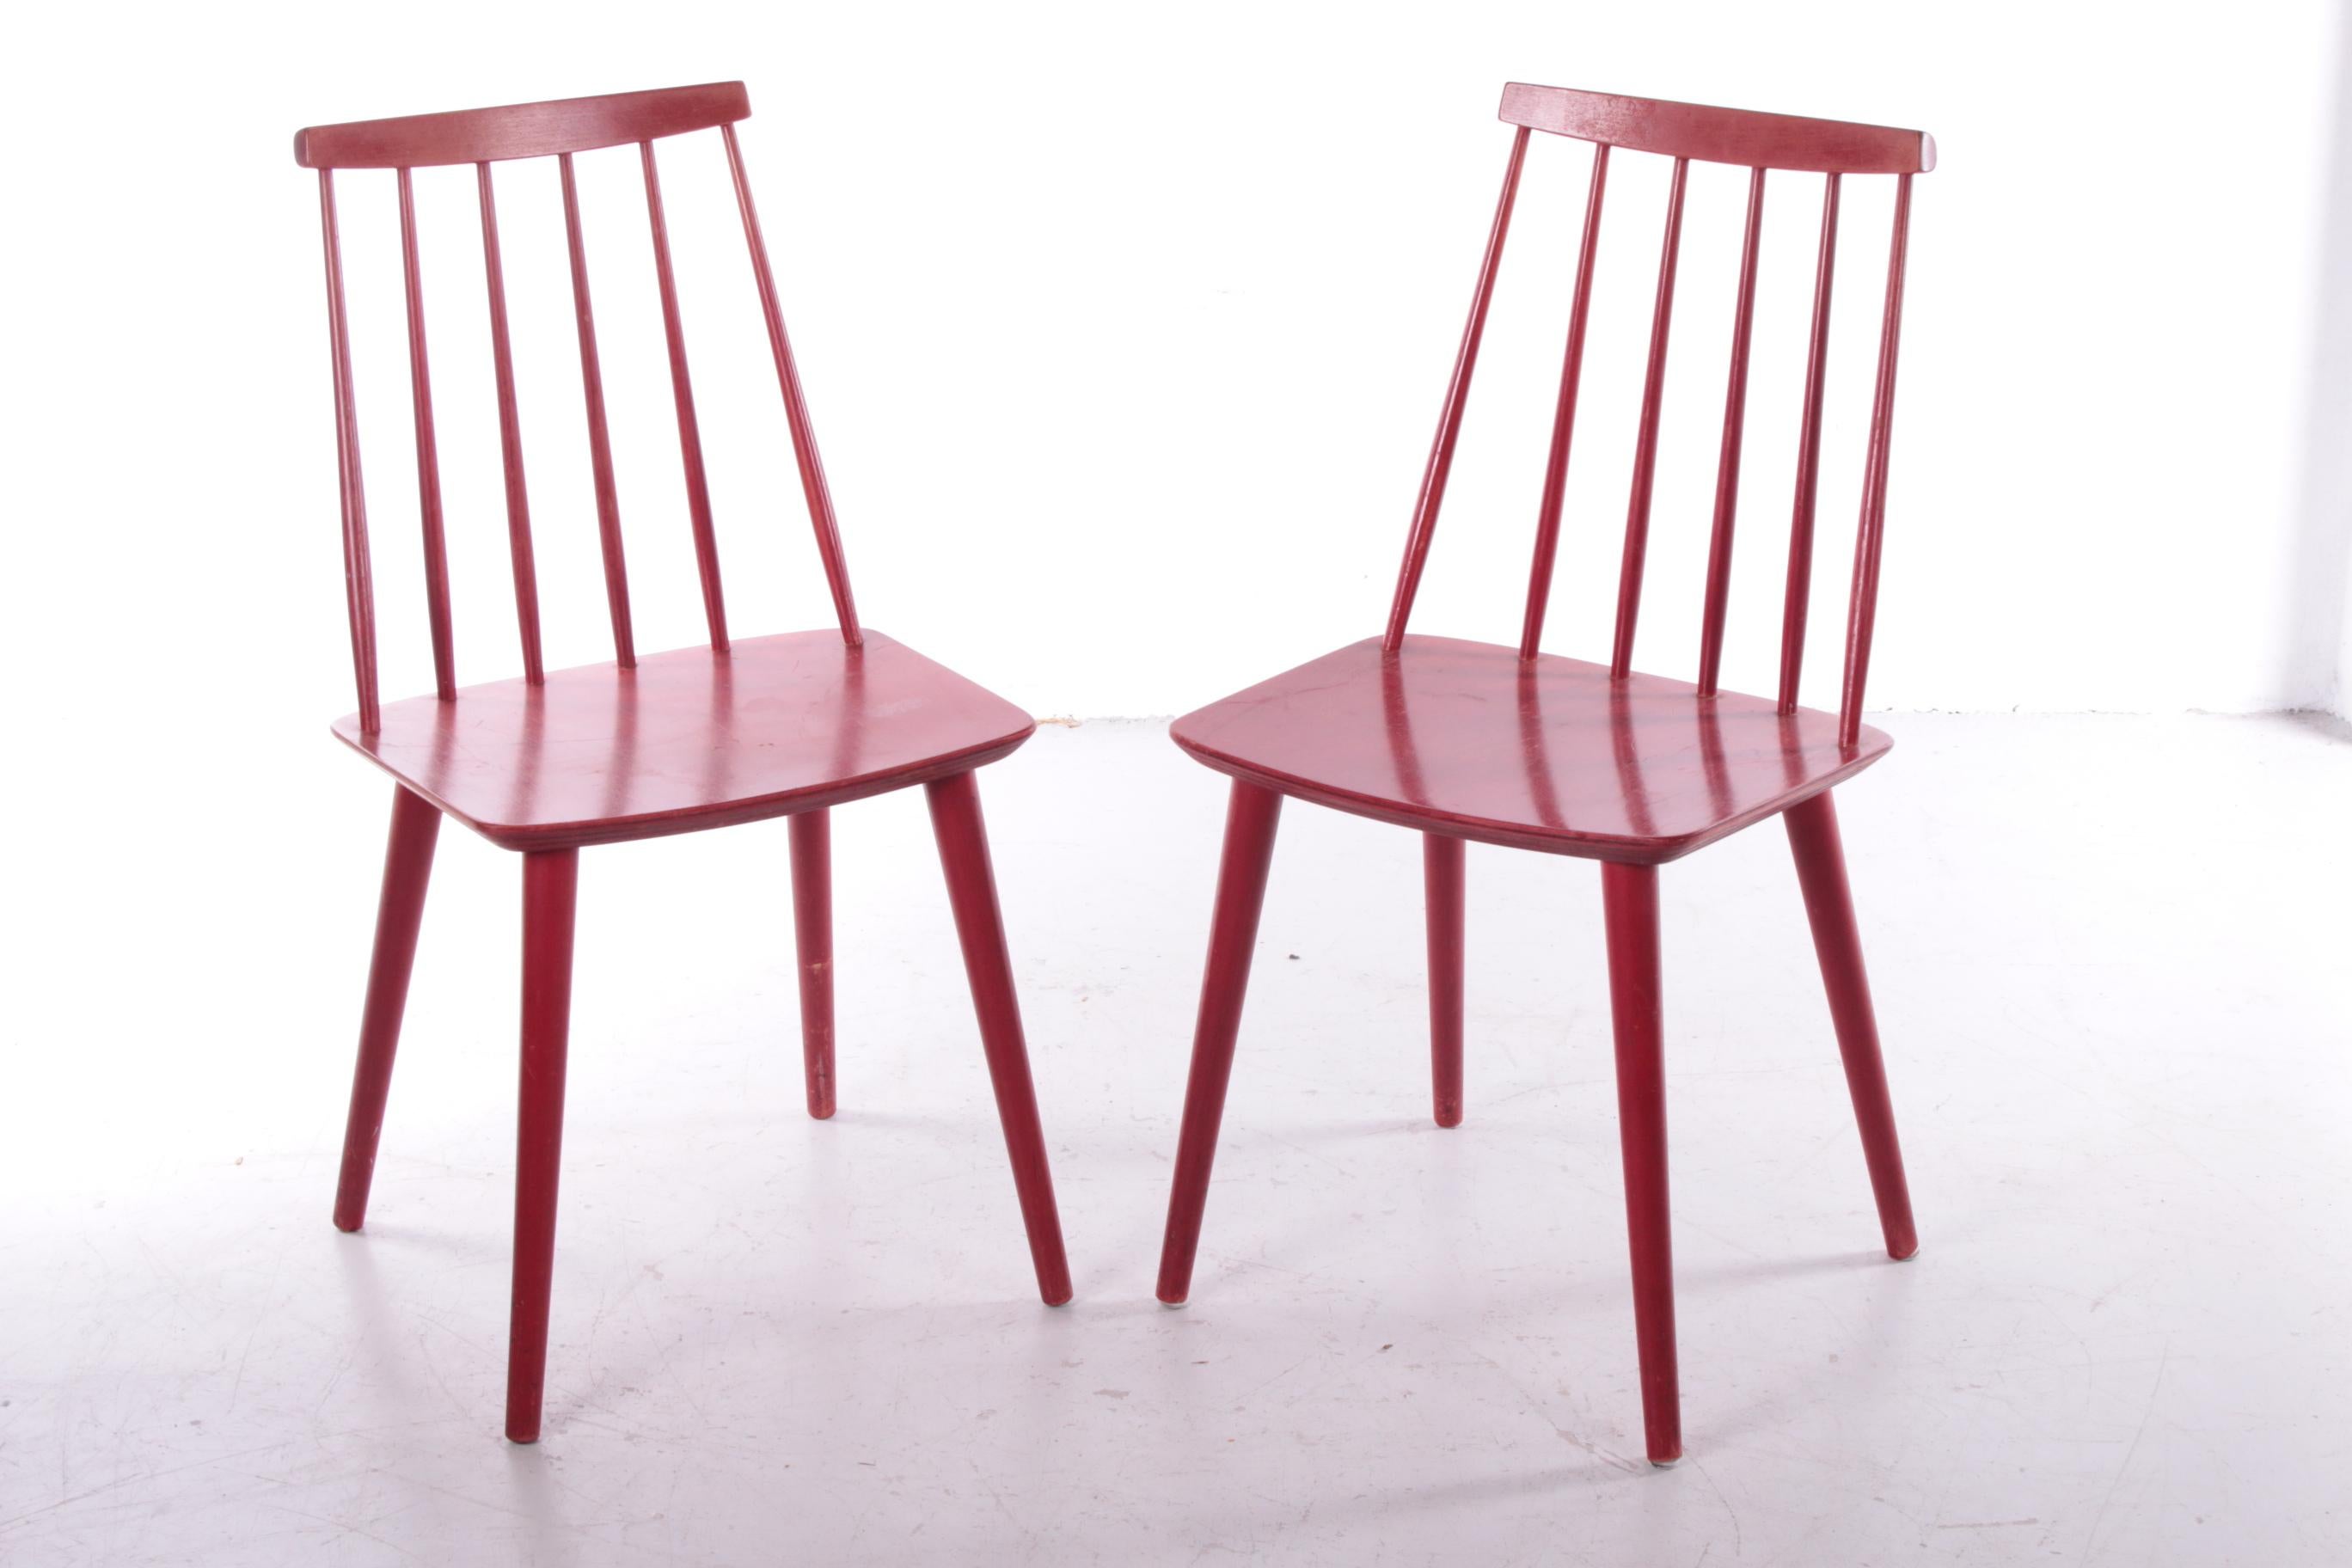 Vintage set of 2 Scandinavian wooden kitchen chairs, 1960s


These matte red bar chairs were made in the 1960s, we have not been able to discover the designer, the model resembles F. Pallsson's j77, but we are not sure.

But the chair is